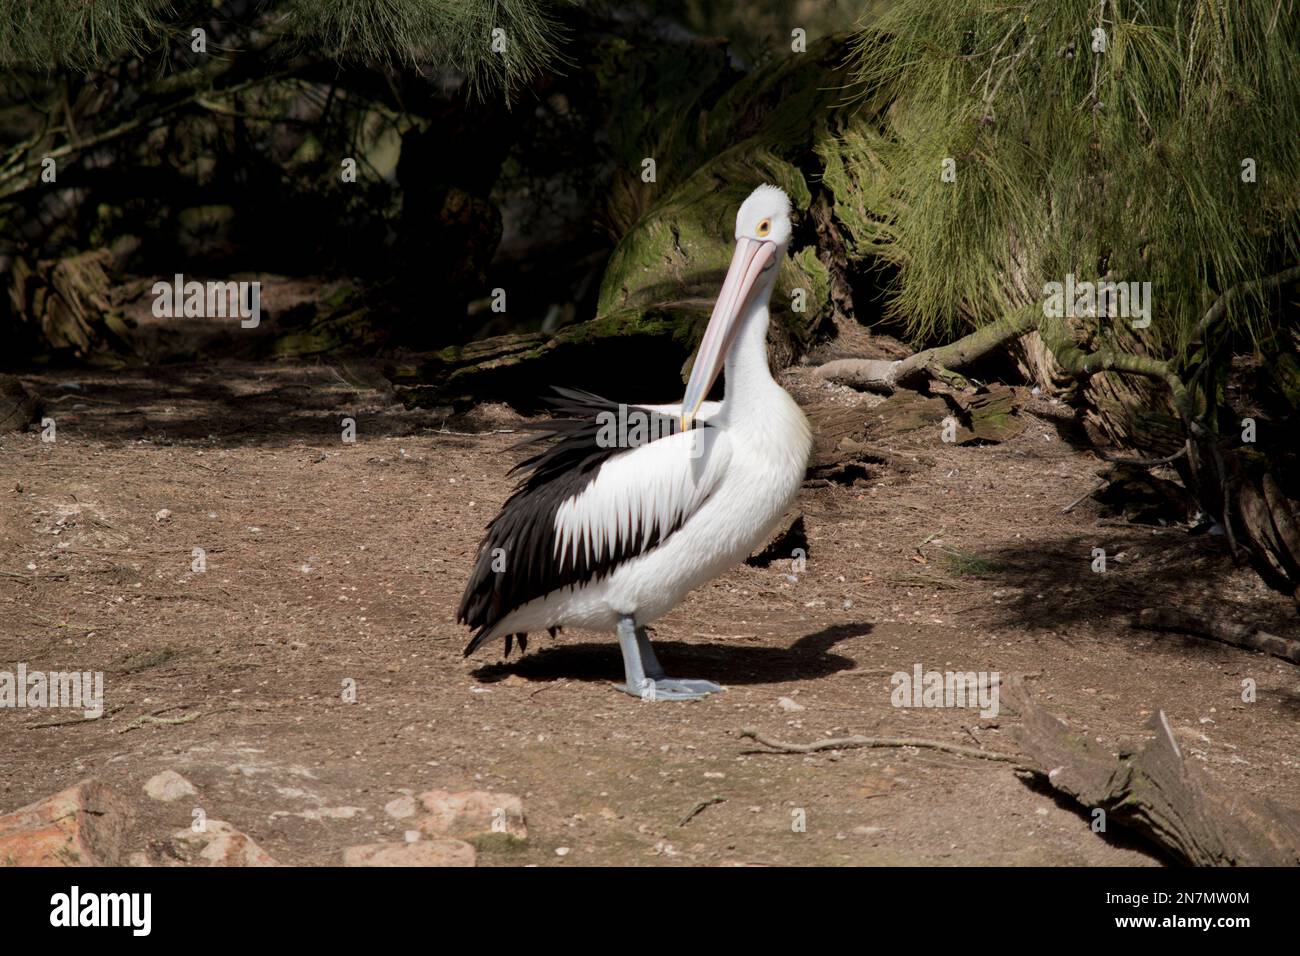 the Australian pelican has a pink bill and yellow eyes Stock Photo